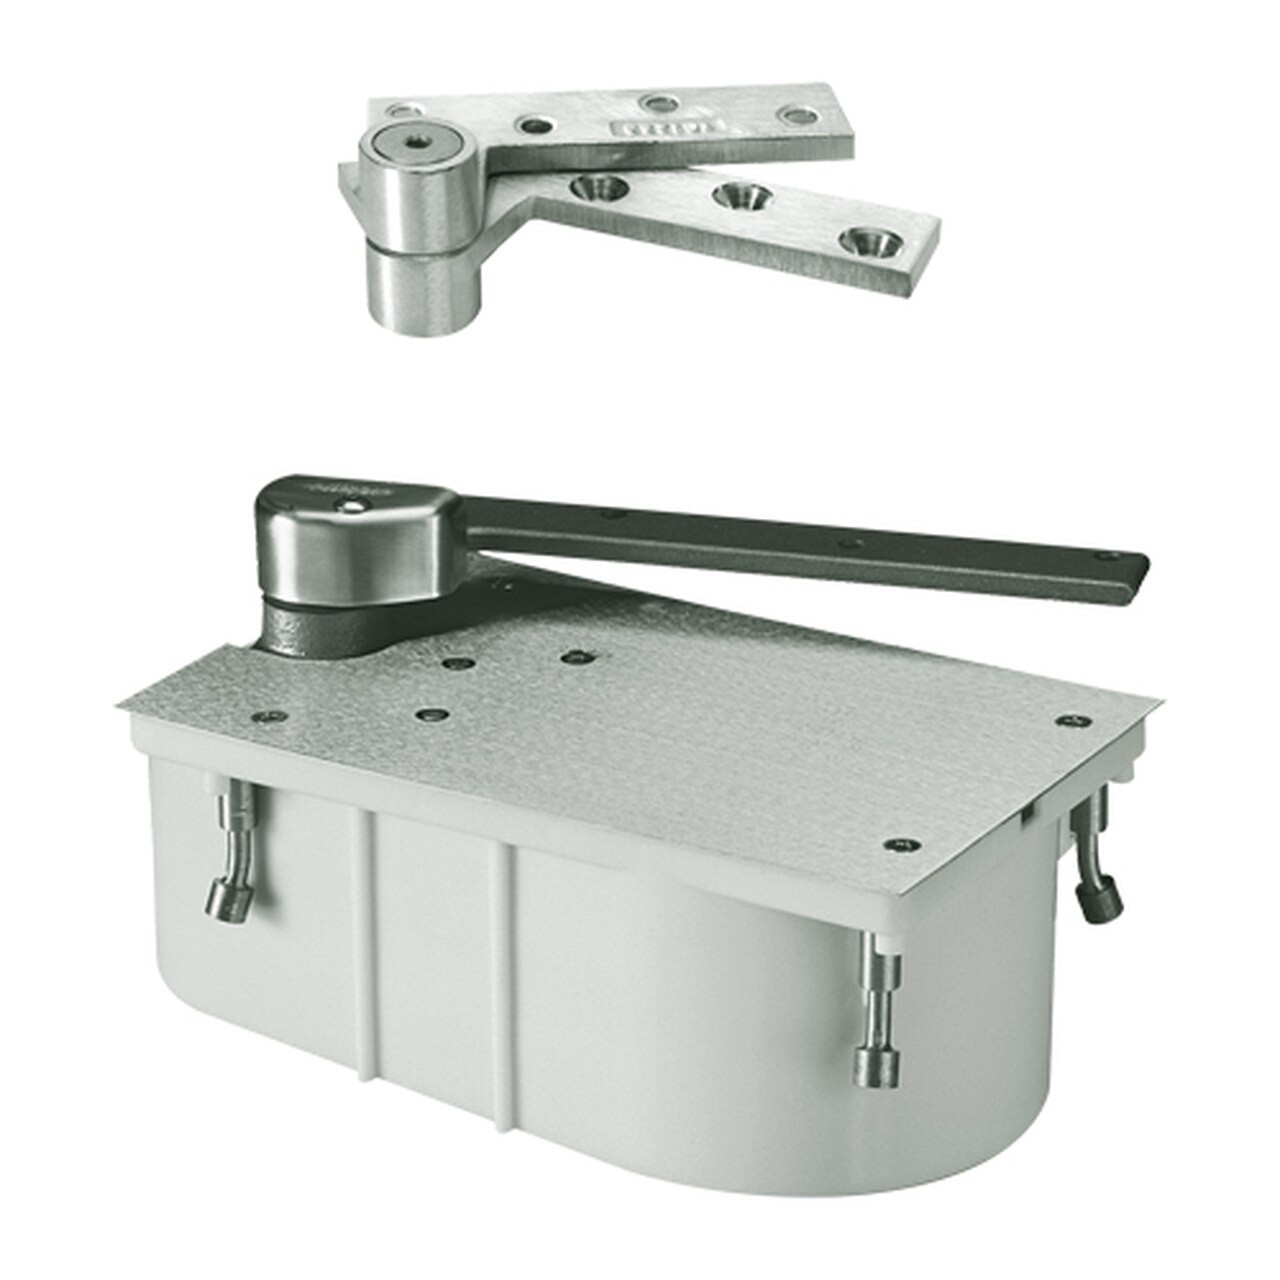 F27-90N-LFP-CWF-LH-619 Rixson 27 Series Fire Rated Heavy Duty 3/4" Offset Hung Floor Closer in Satin Nickel Finish